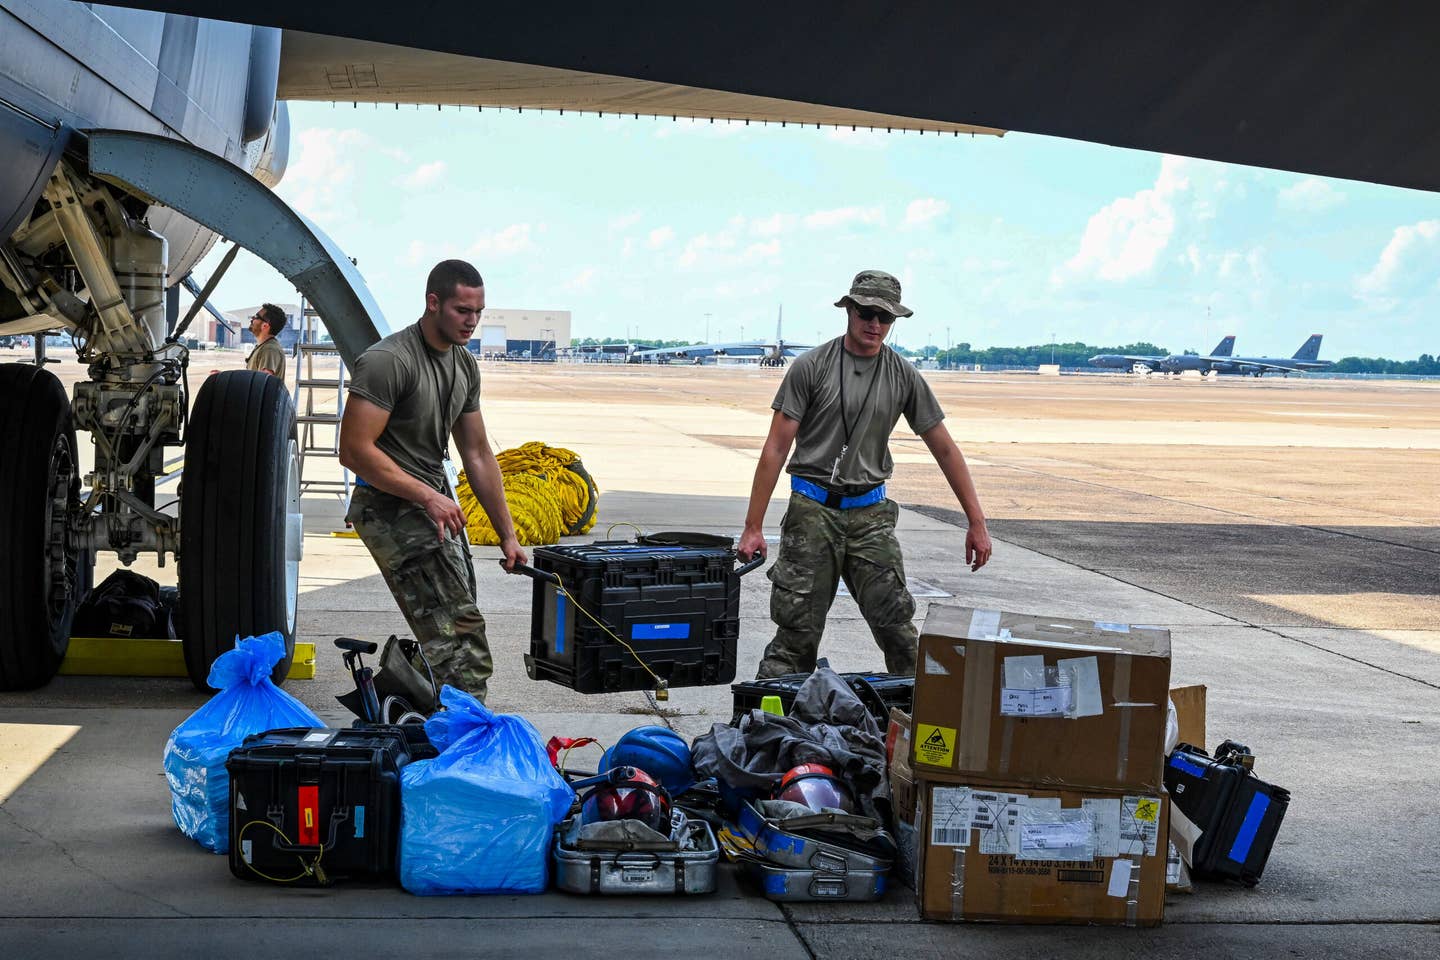 Airmen from the 2nd Aircraft Maintenance Squadron unload maintenance and support equipment from a B-52 On-board Cargo System after an Agile Combat Employment exercise at Barksdale Air Force Base. <em>Credit: Airman Nicole Ledbetter/U.S. Air Force</em>